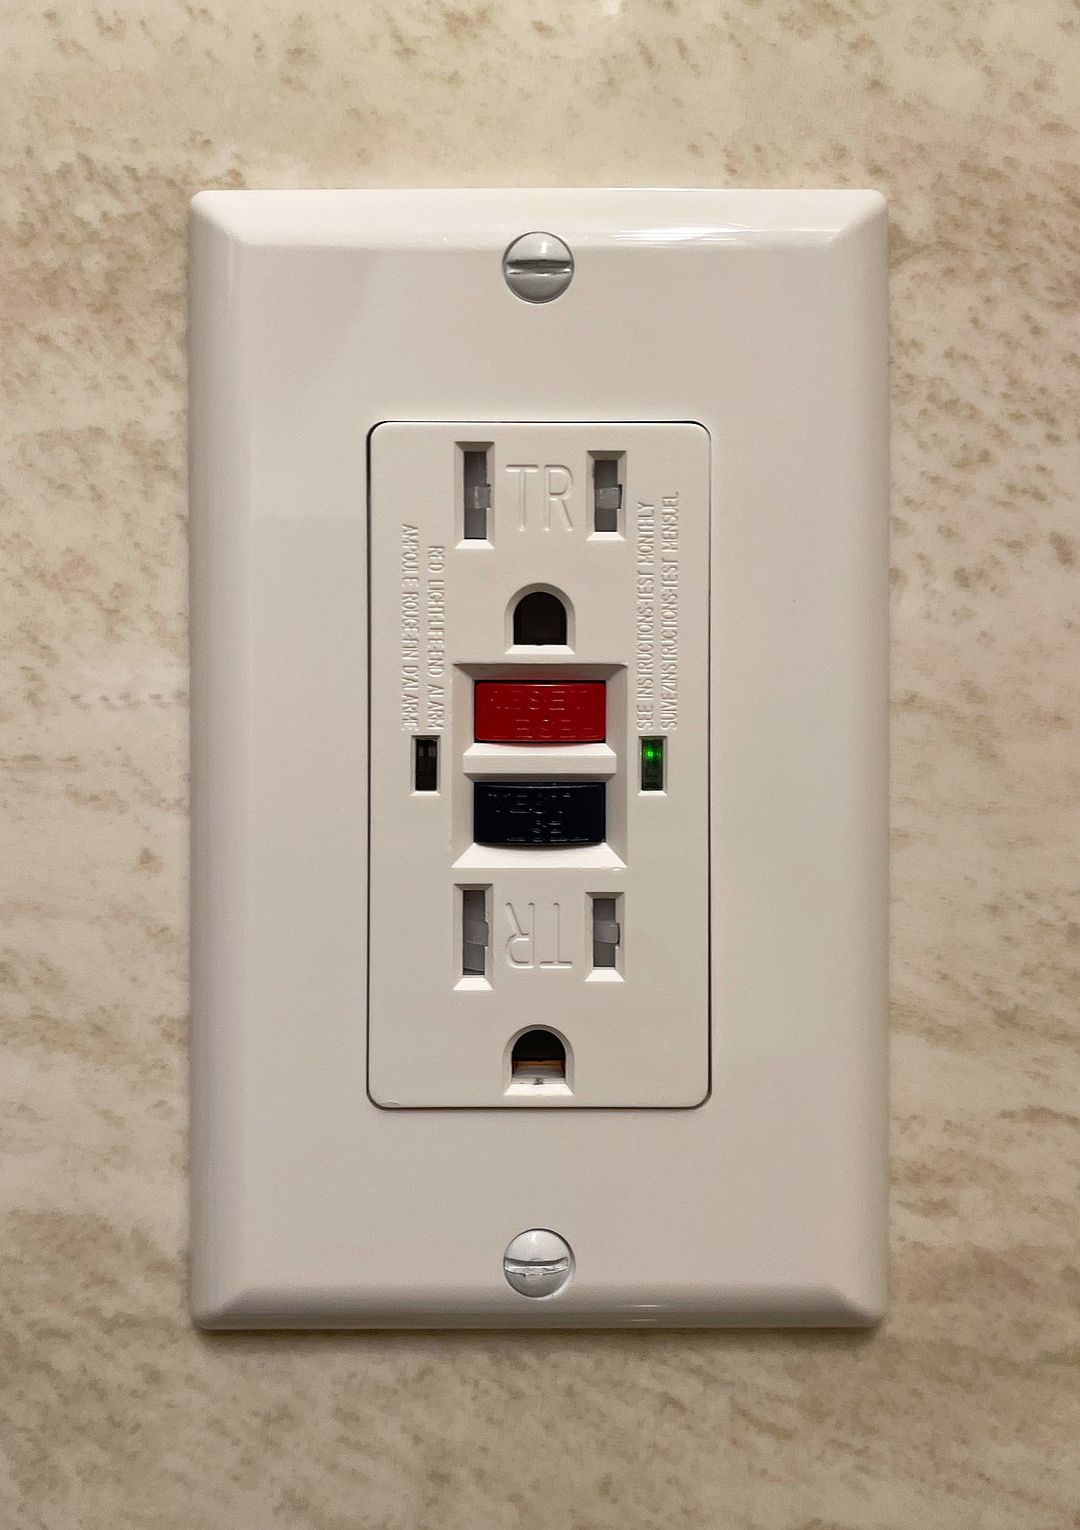 A ground fault circuit interrupter (GFCI) can help prevent electrocution.